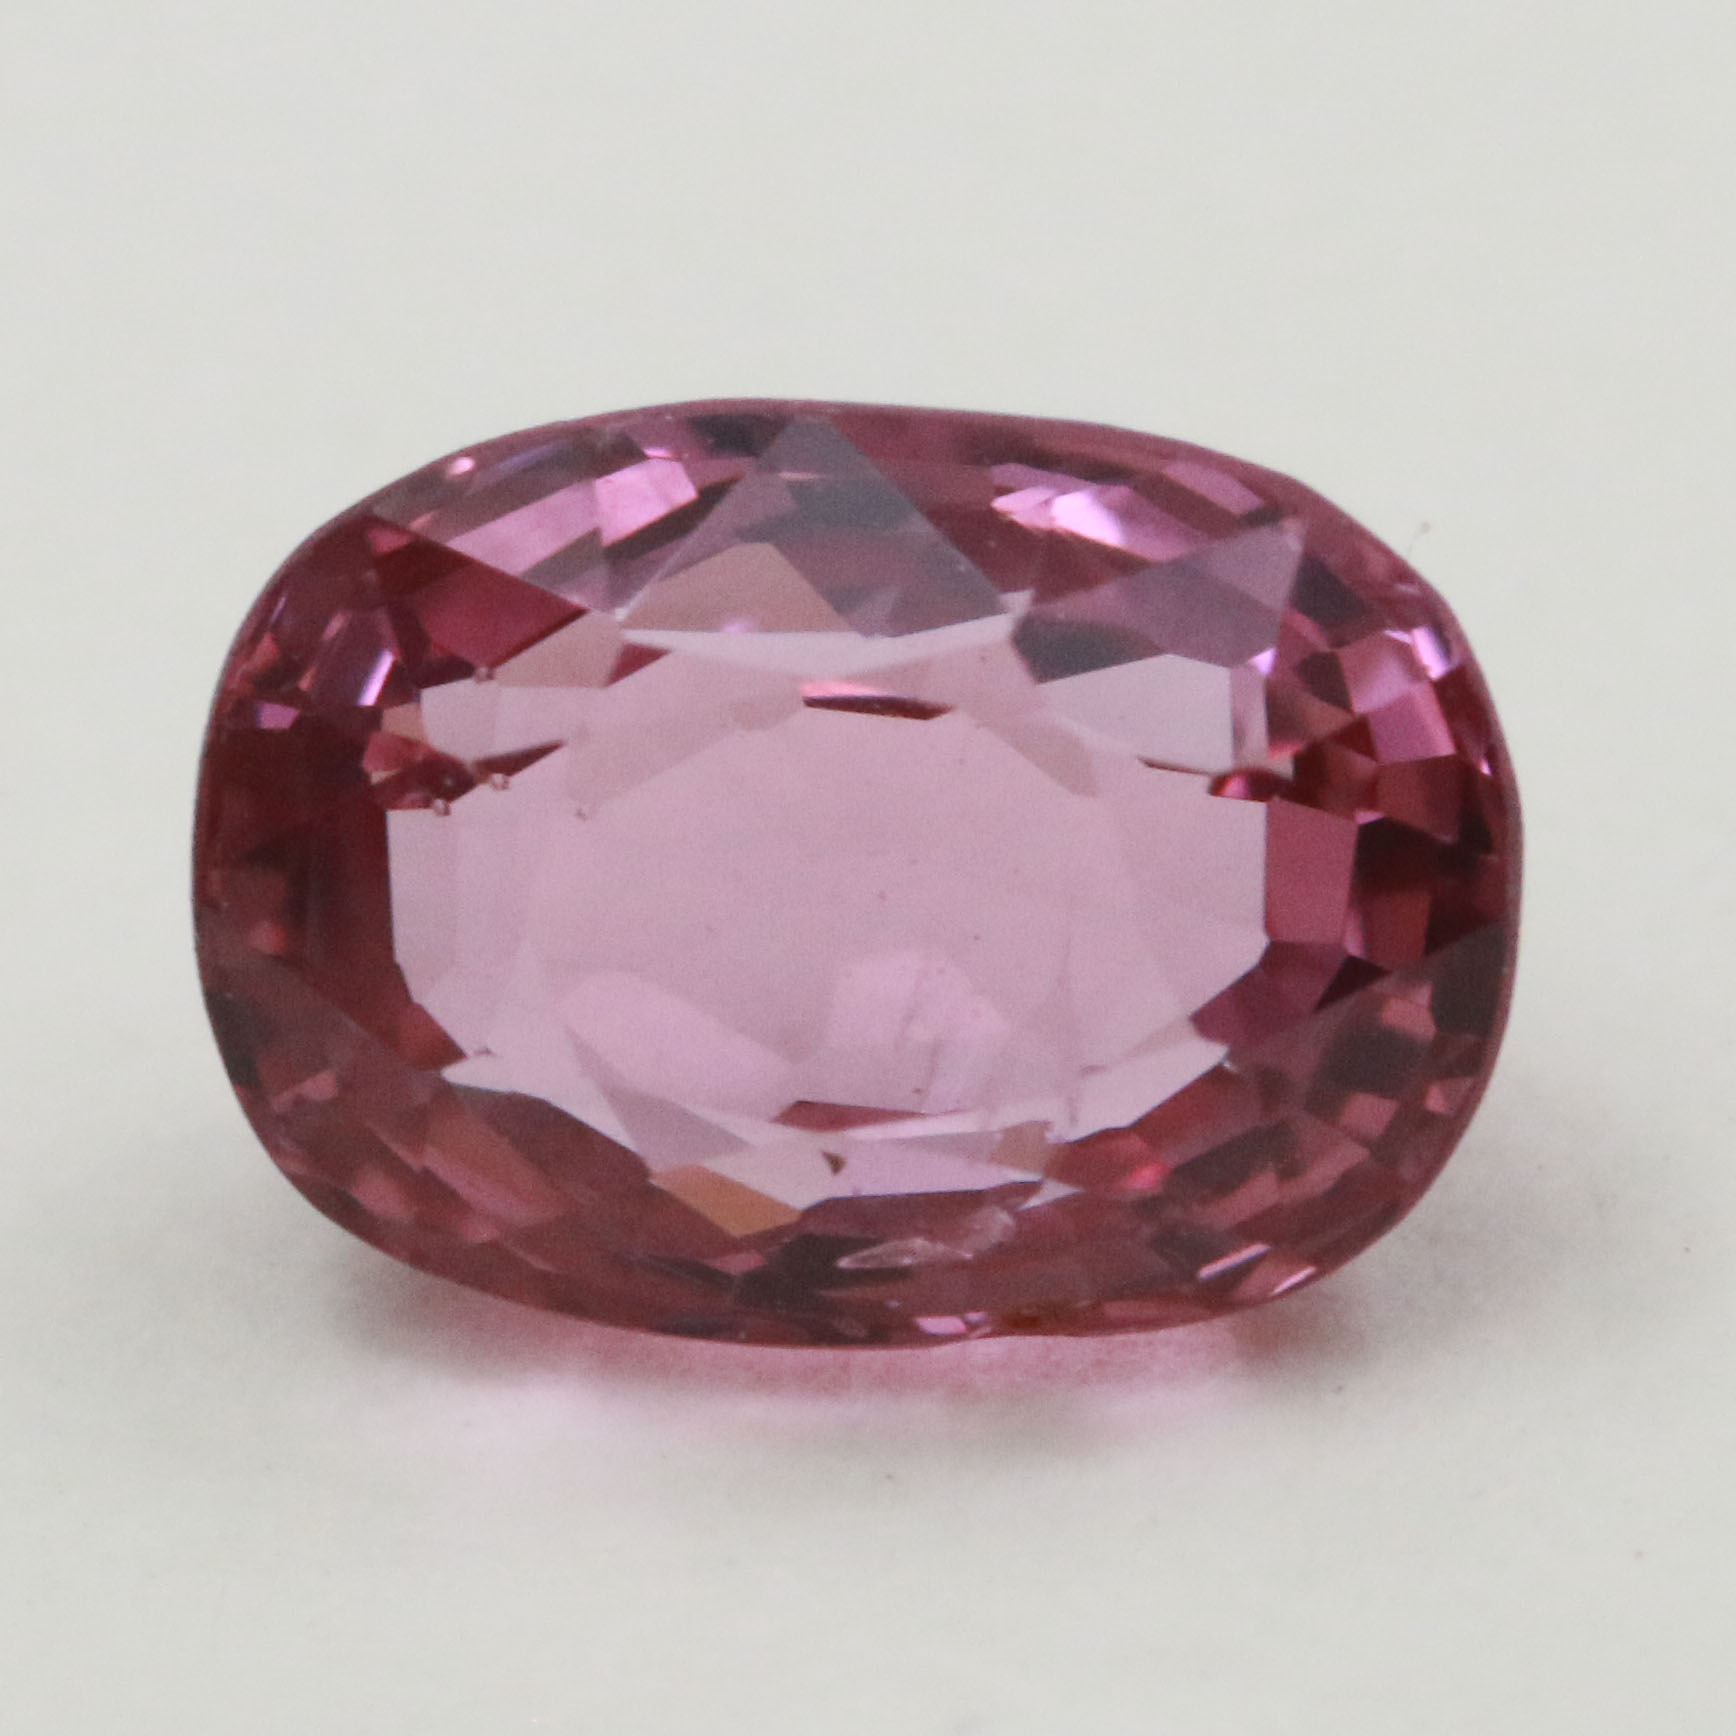 SPINEL 7.7X5.5 OVAL 1.58CT